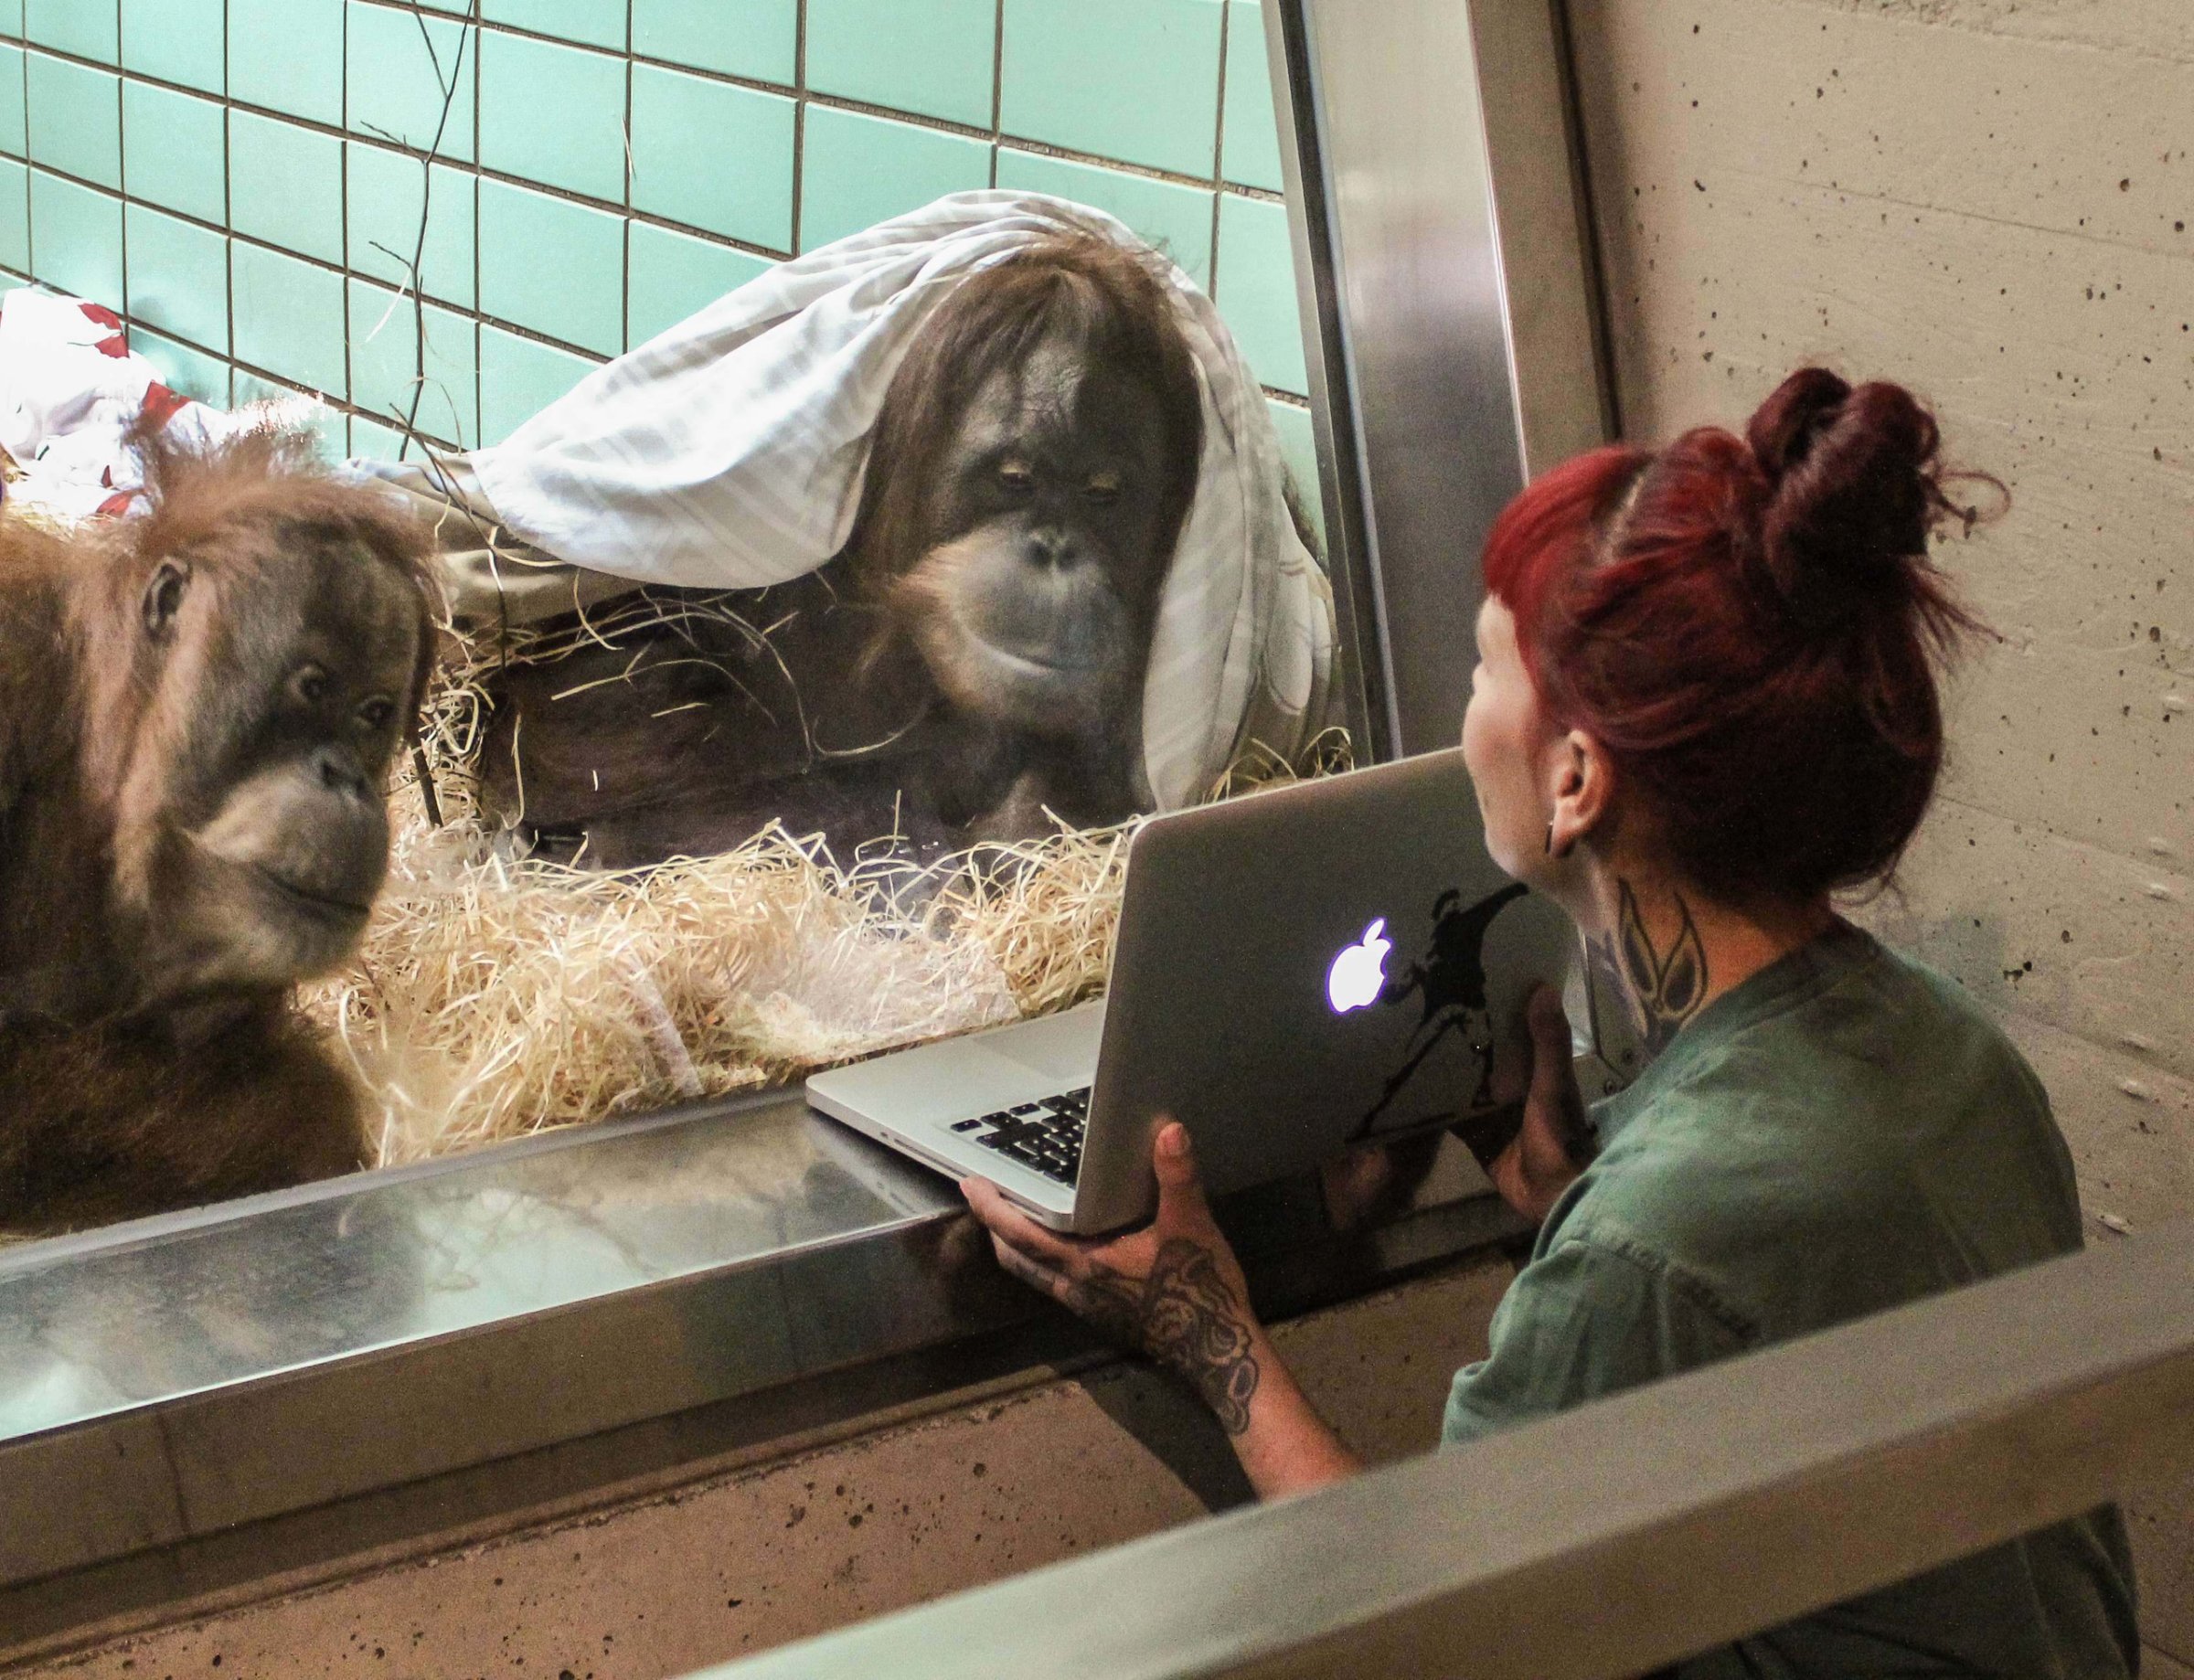 Conny, left, and Sinta, right, together watch video of Orangutan male Gempa.